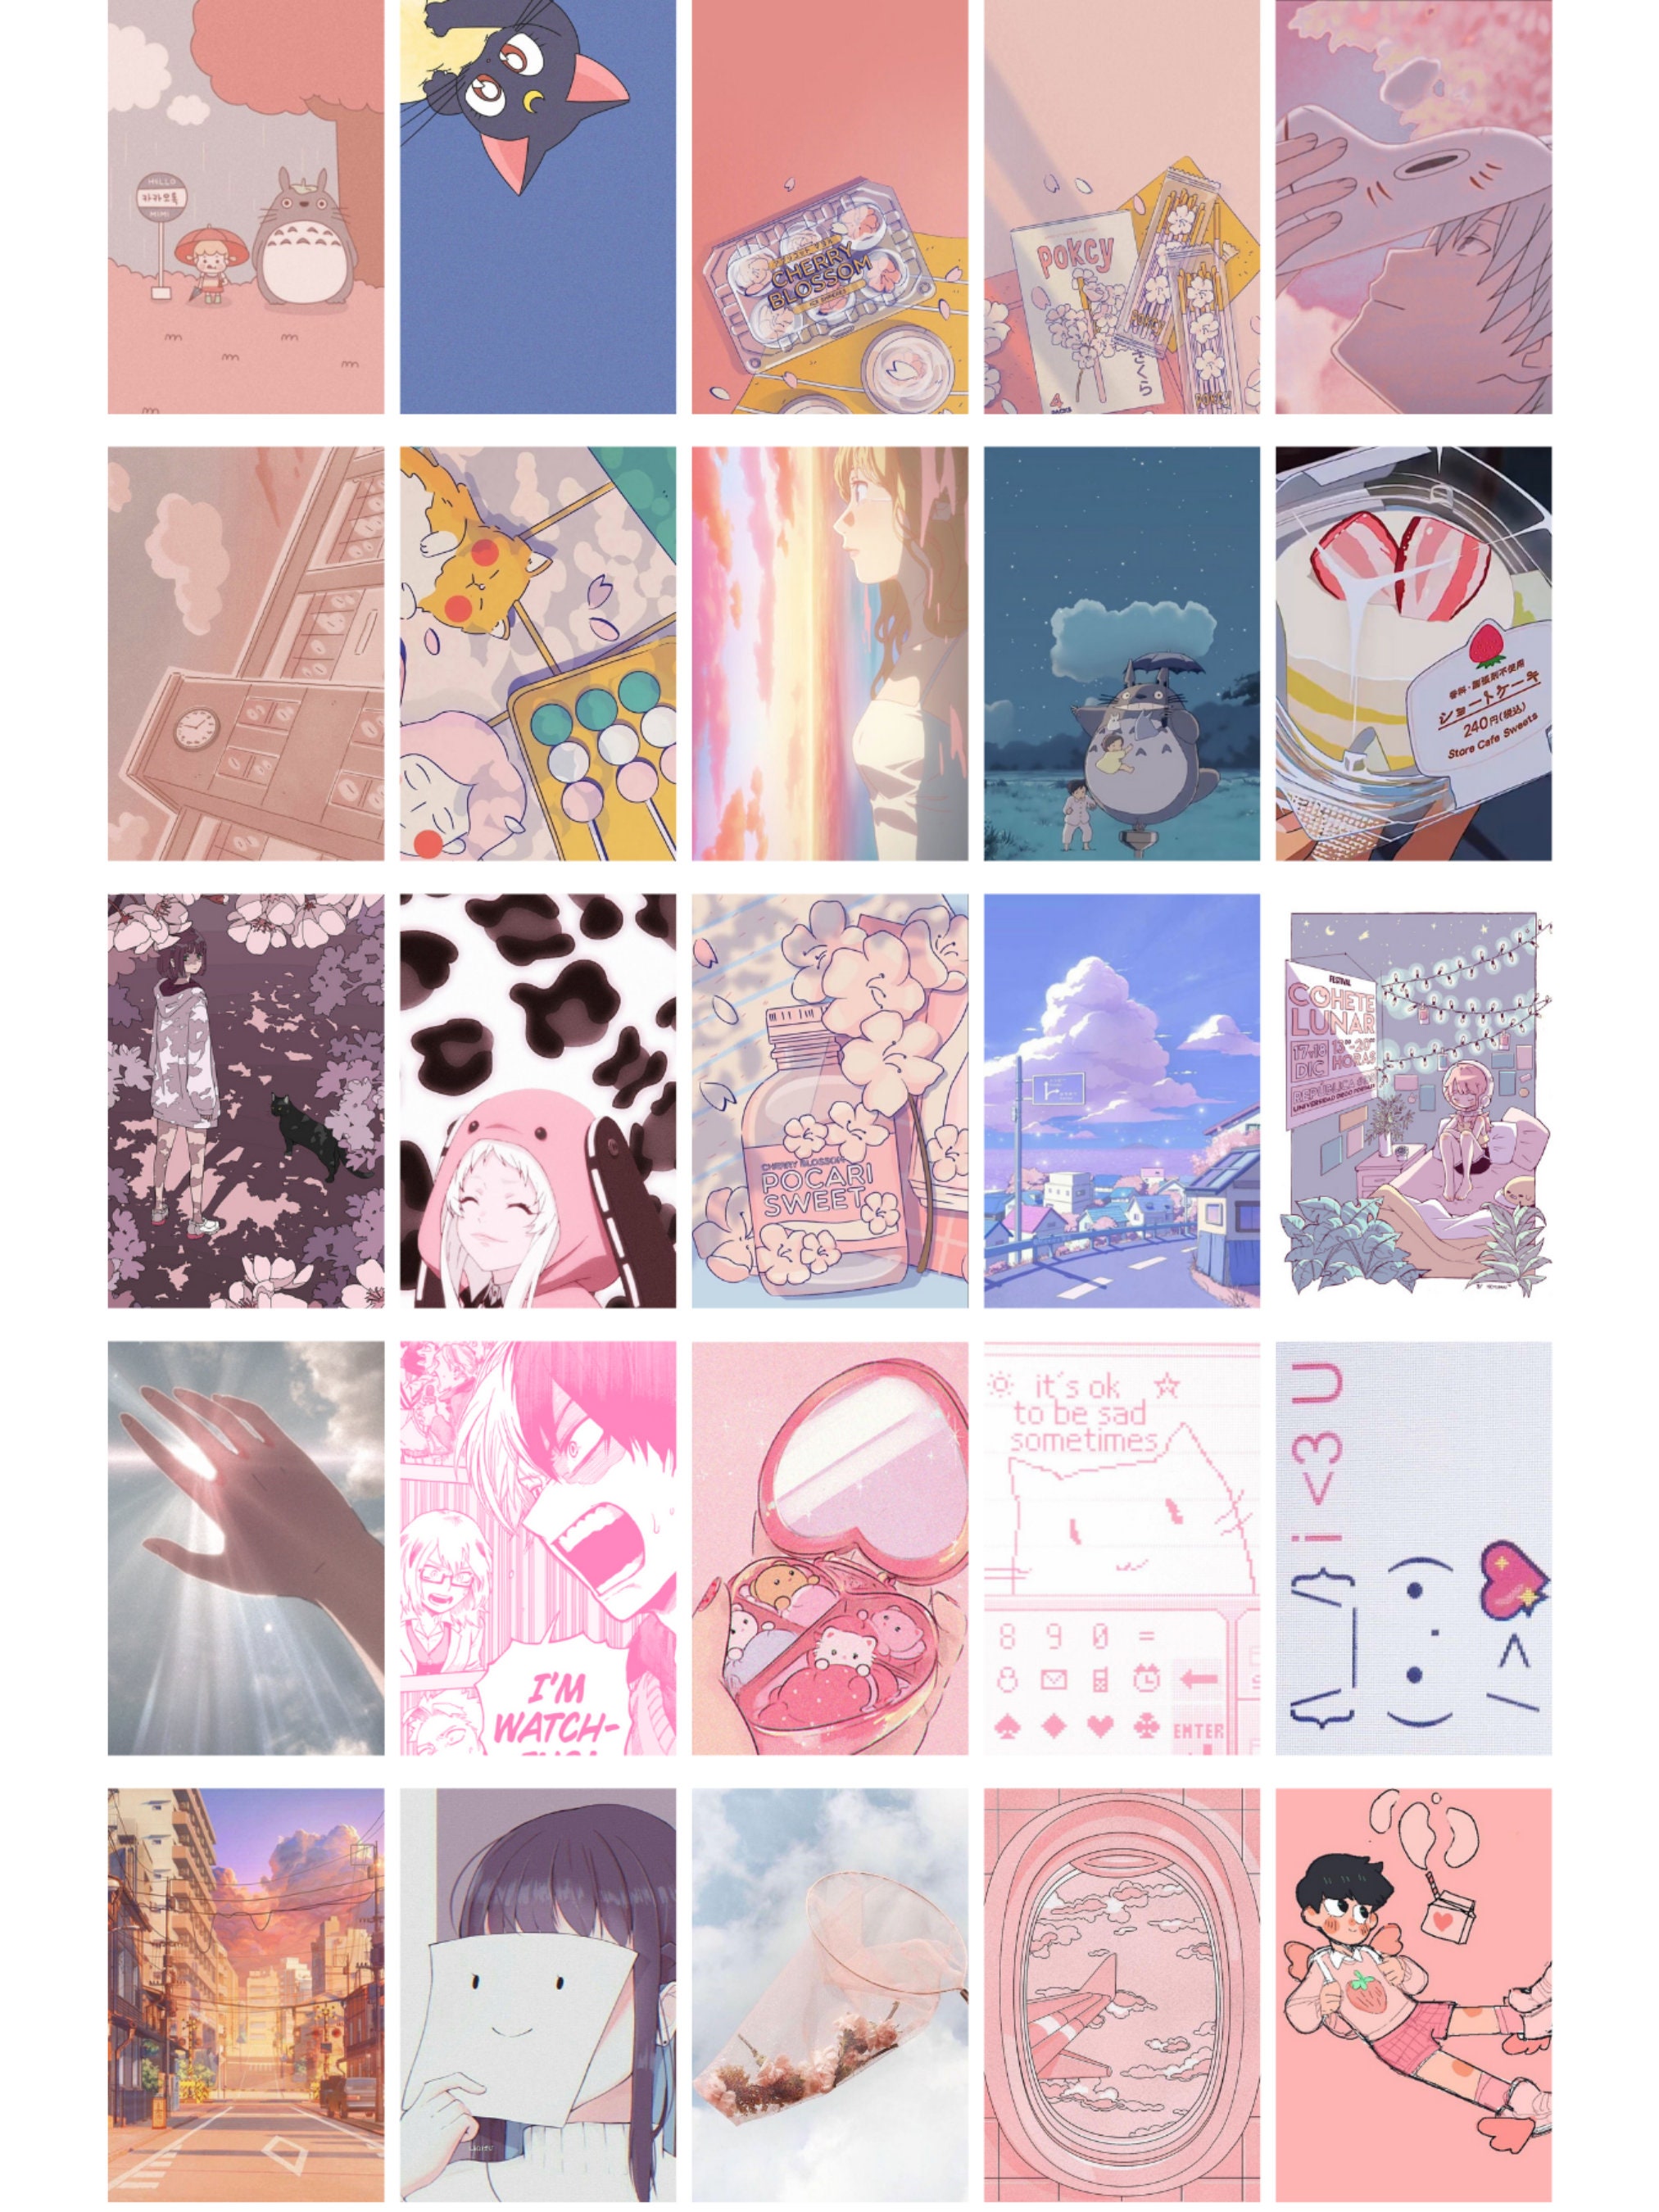 Digital Wall Collage Kit 110pcs Downloadable Anime Poster - Etsy